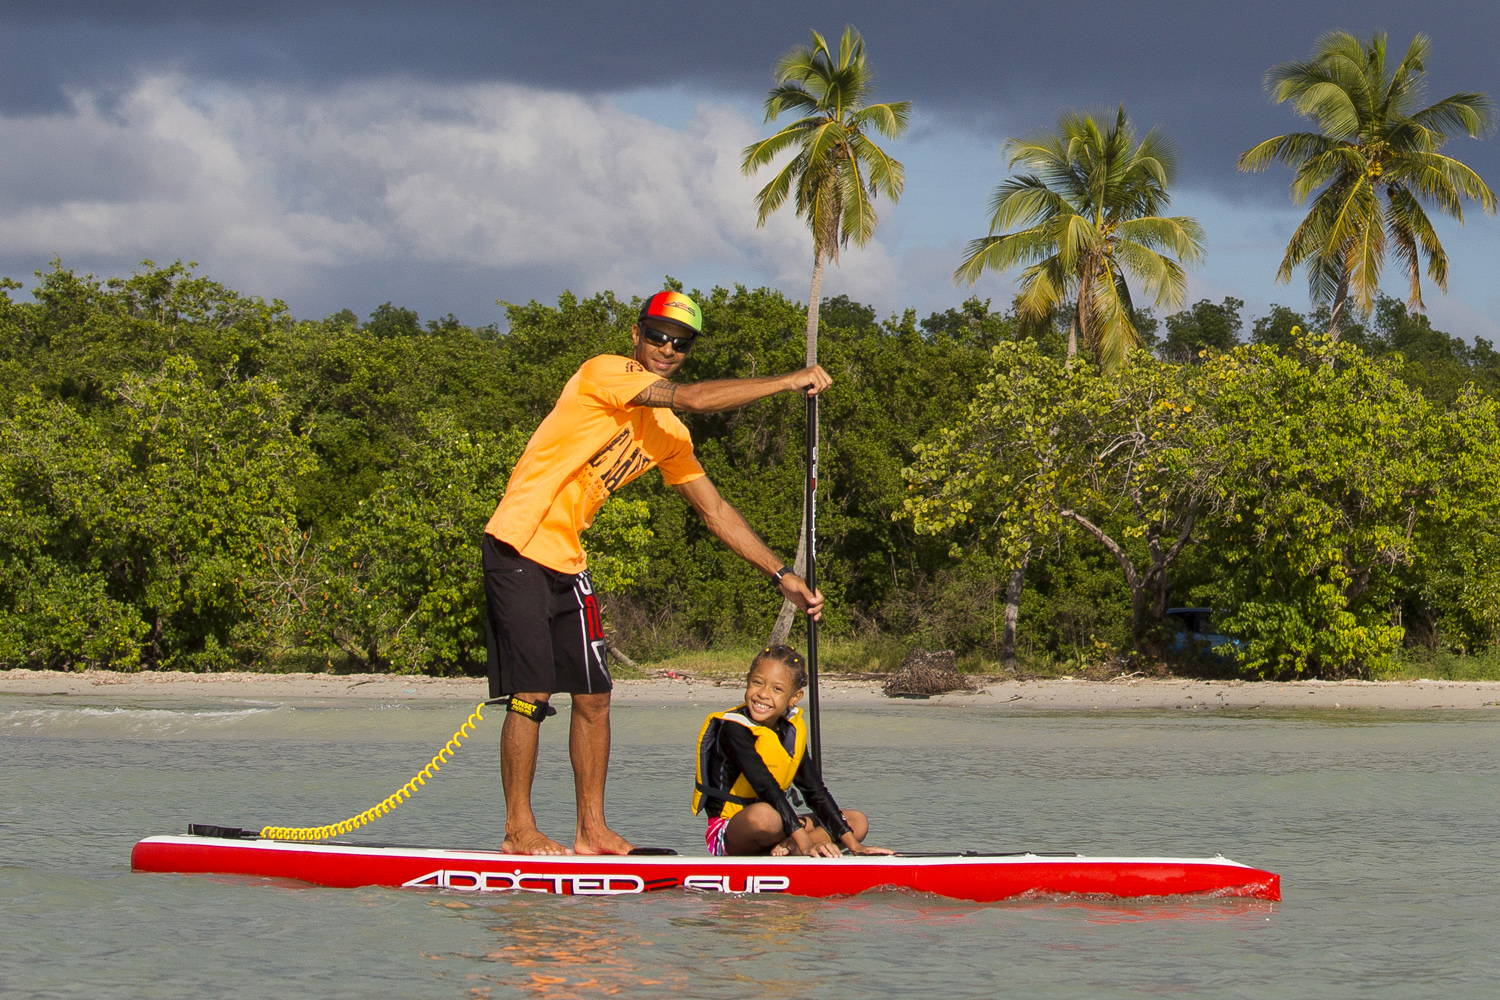 425pro Air SUP Race Board in Action: Man and a child